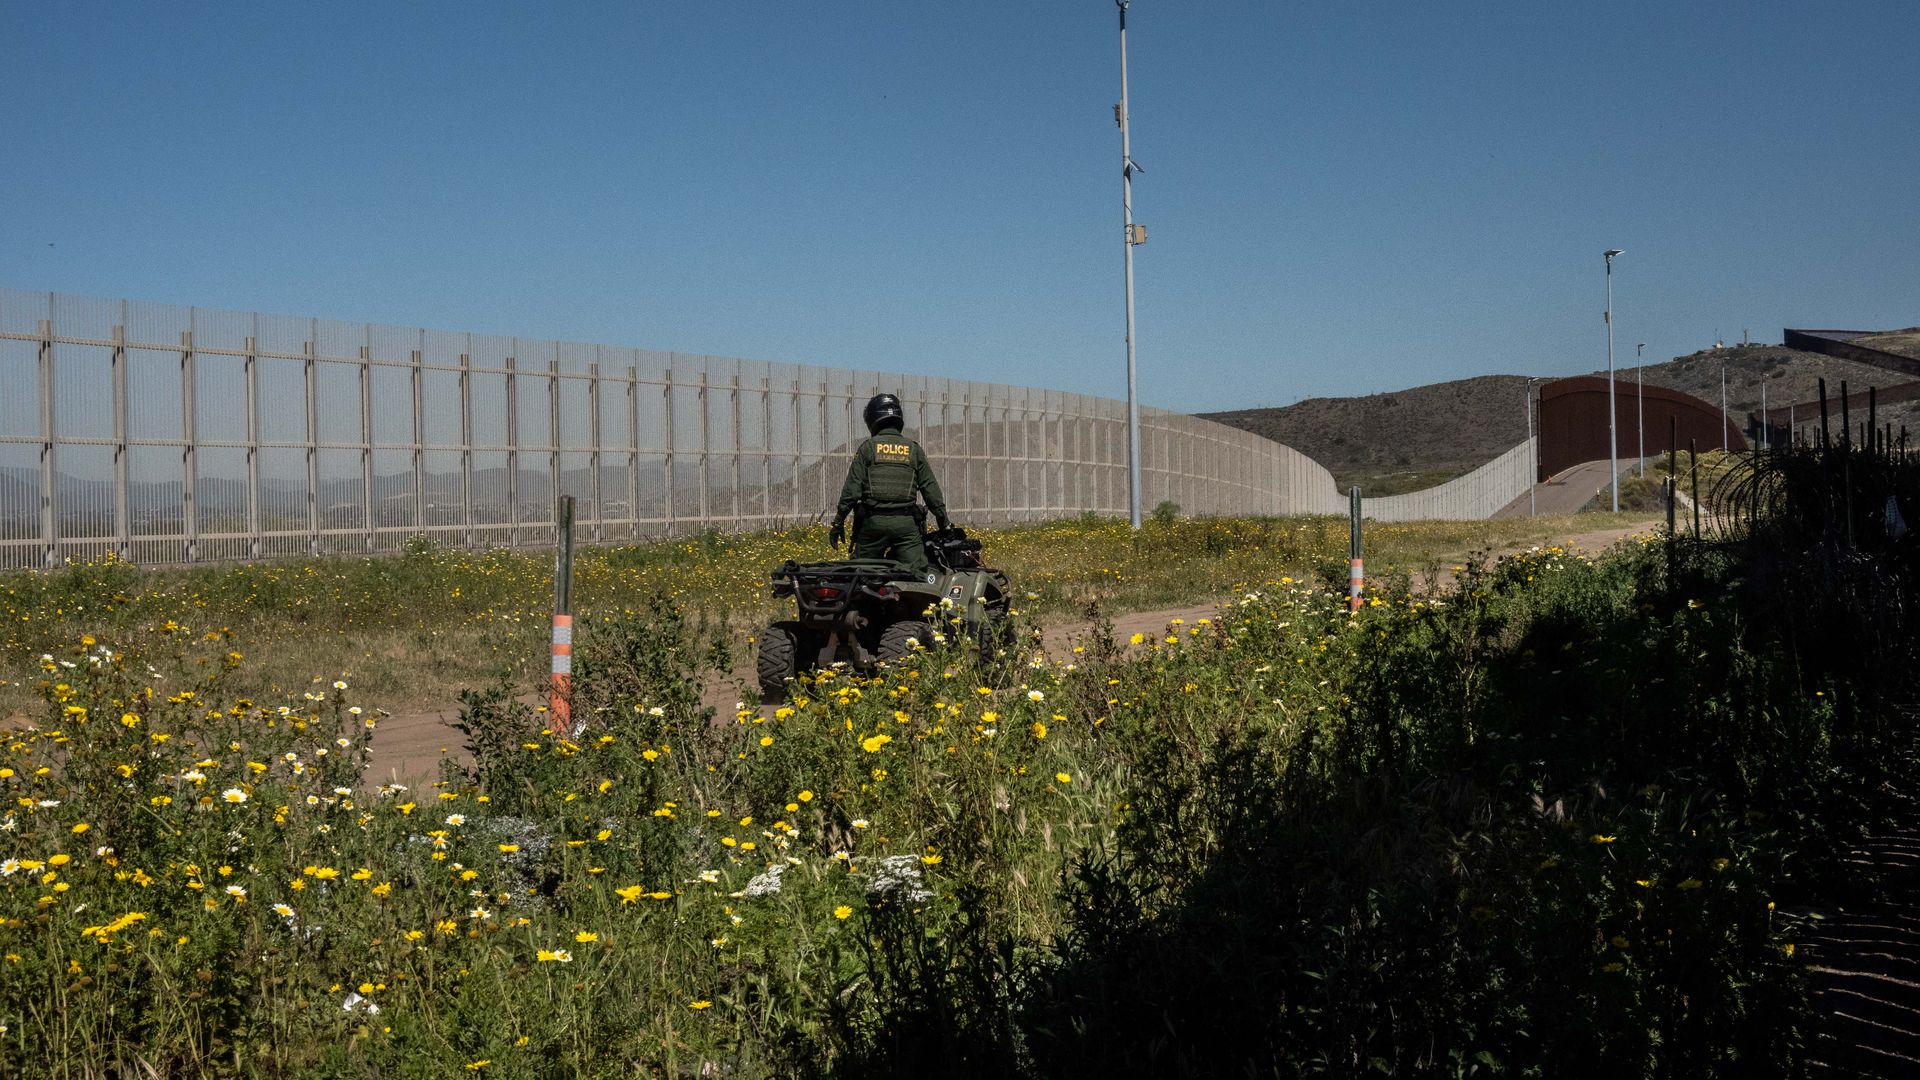 A U.S. law enforcement officer patrols a section of the U.S. and Mexico border fence in Tijuana, Mexico, on Wednesday, March 23, 2022